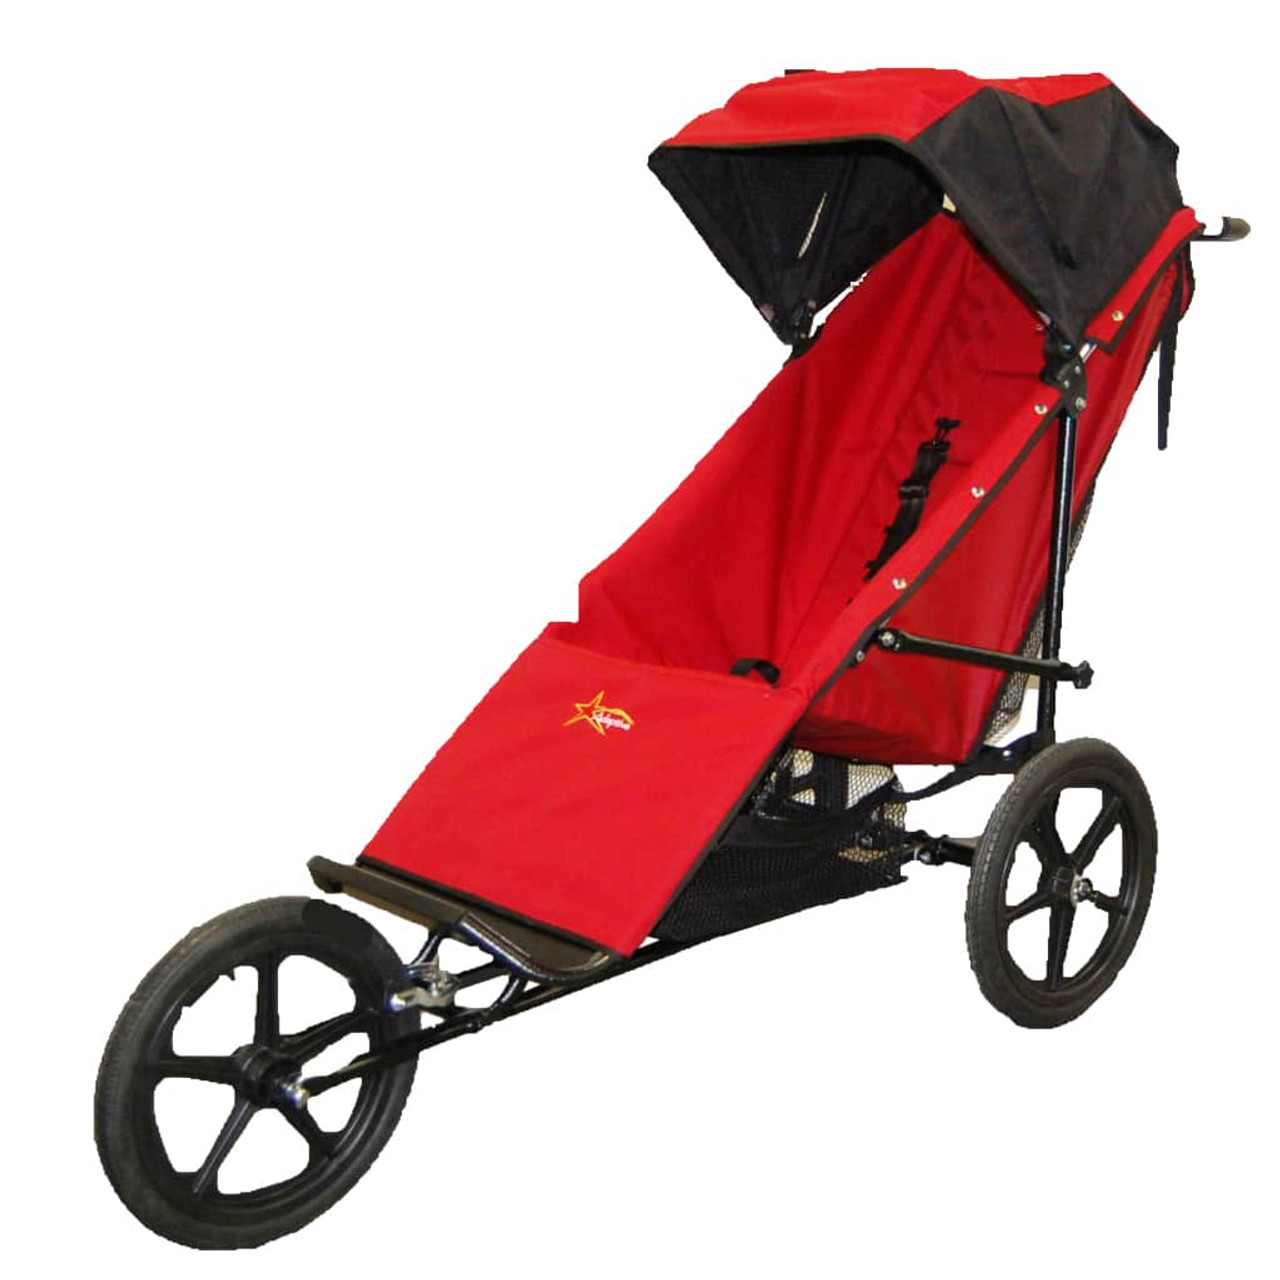 Adaptive Star AXIOM PHOENIX 3 Indoor/Outdoor Mobility Stroller,  Red, Each